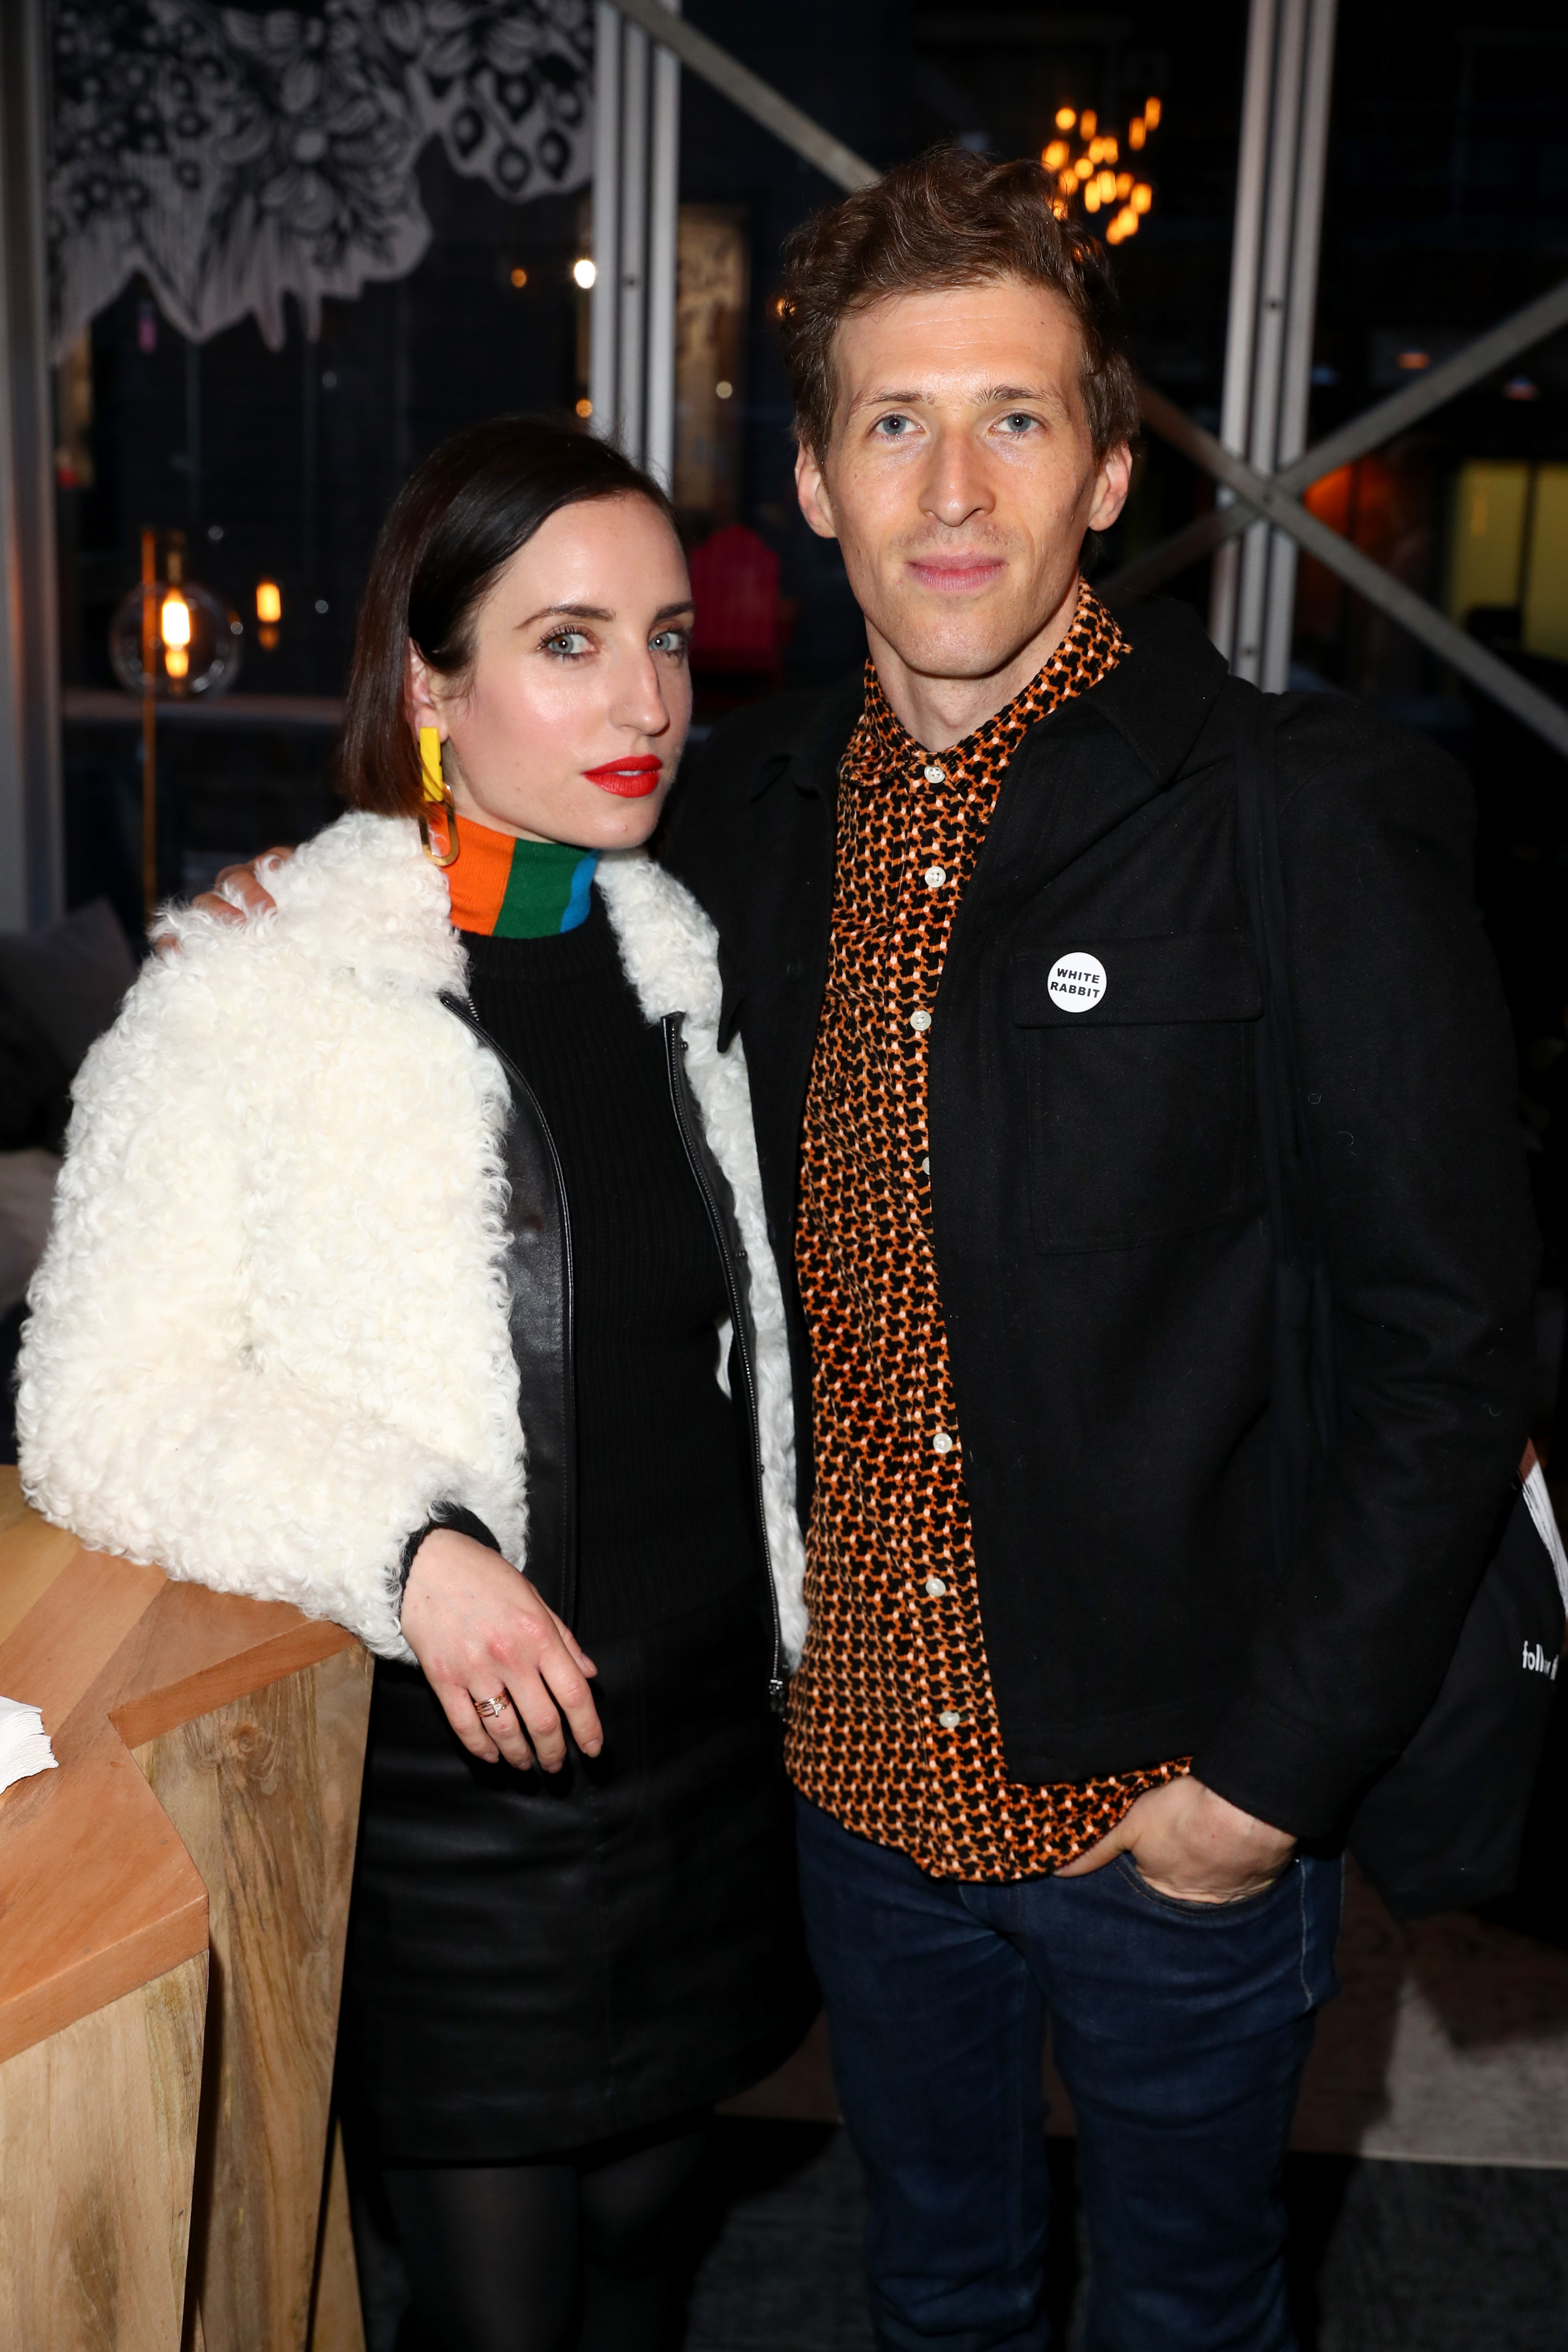 Zoe Lister-Jones and Daryl Wein at the "White Rabbit" cocktail party during the Sundance Film Festival 2018, on January 19, 2018, in Park City, Utah | Source: Getty Images